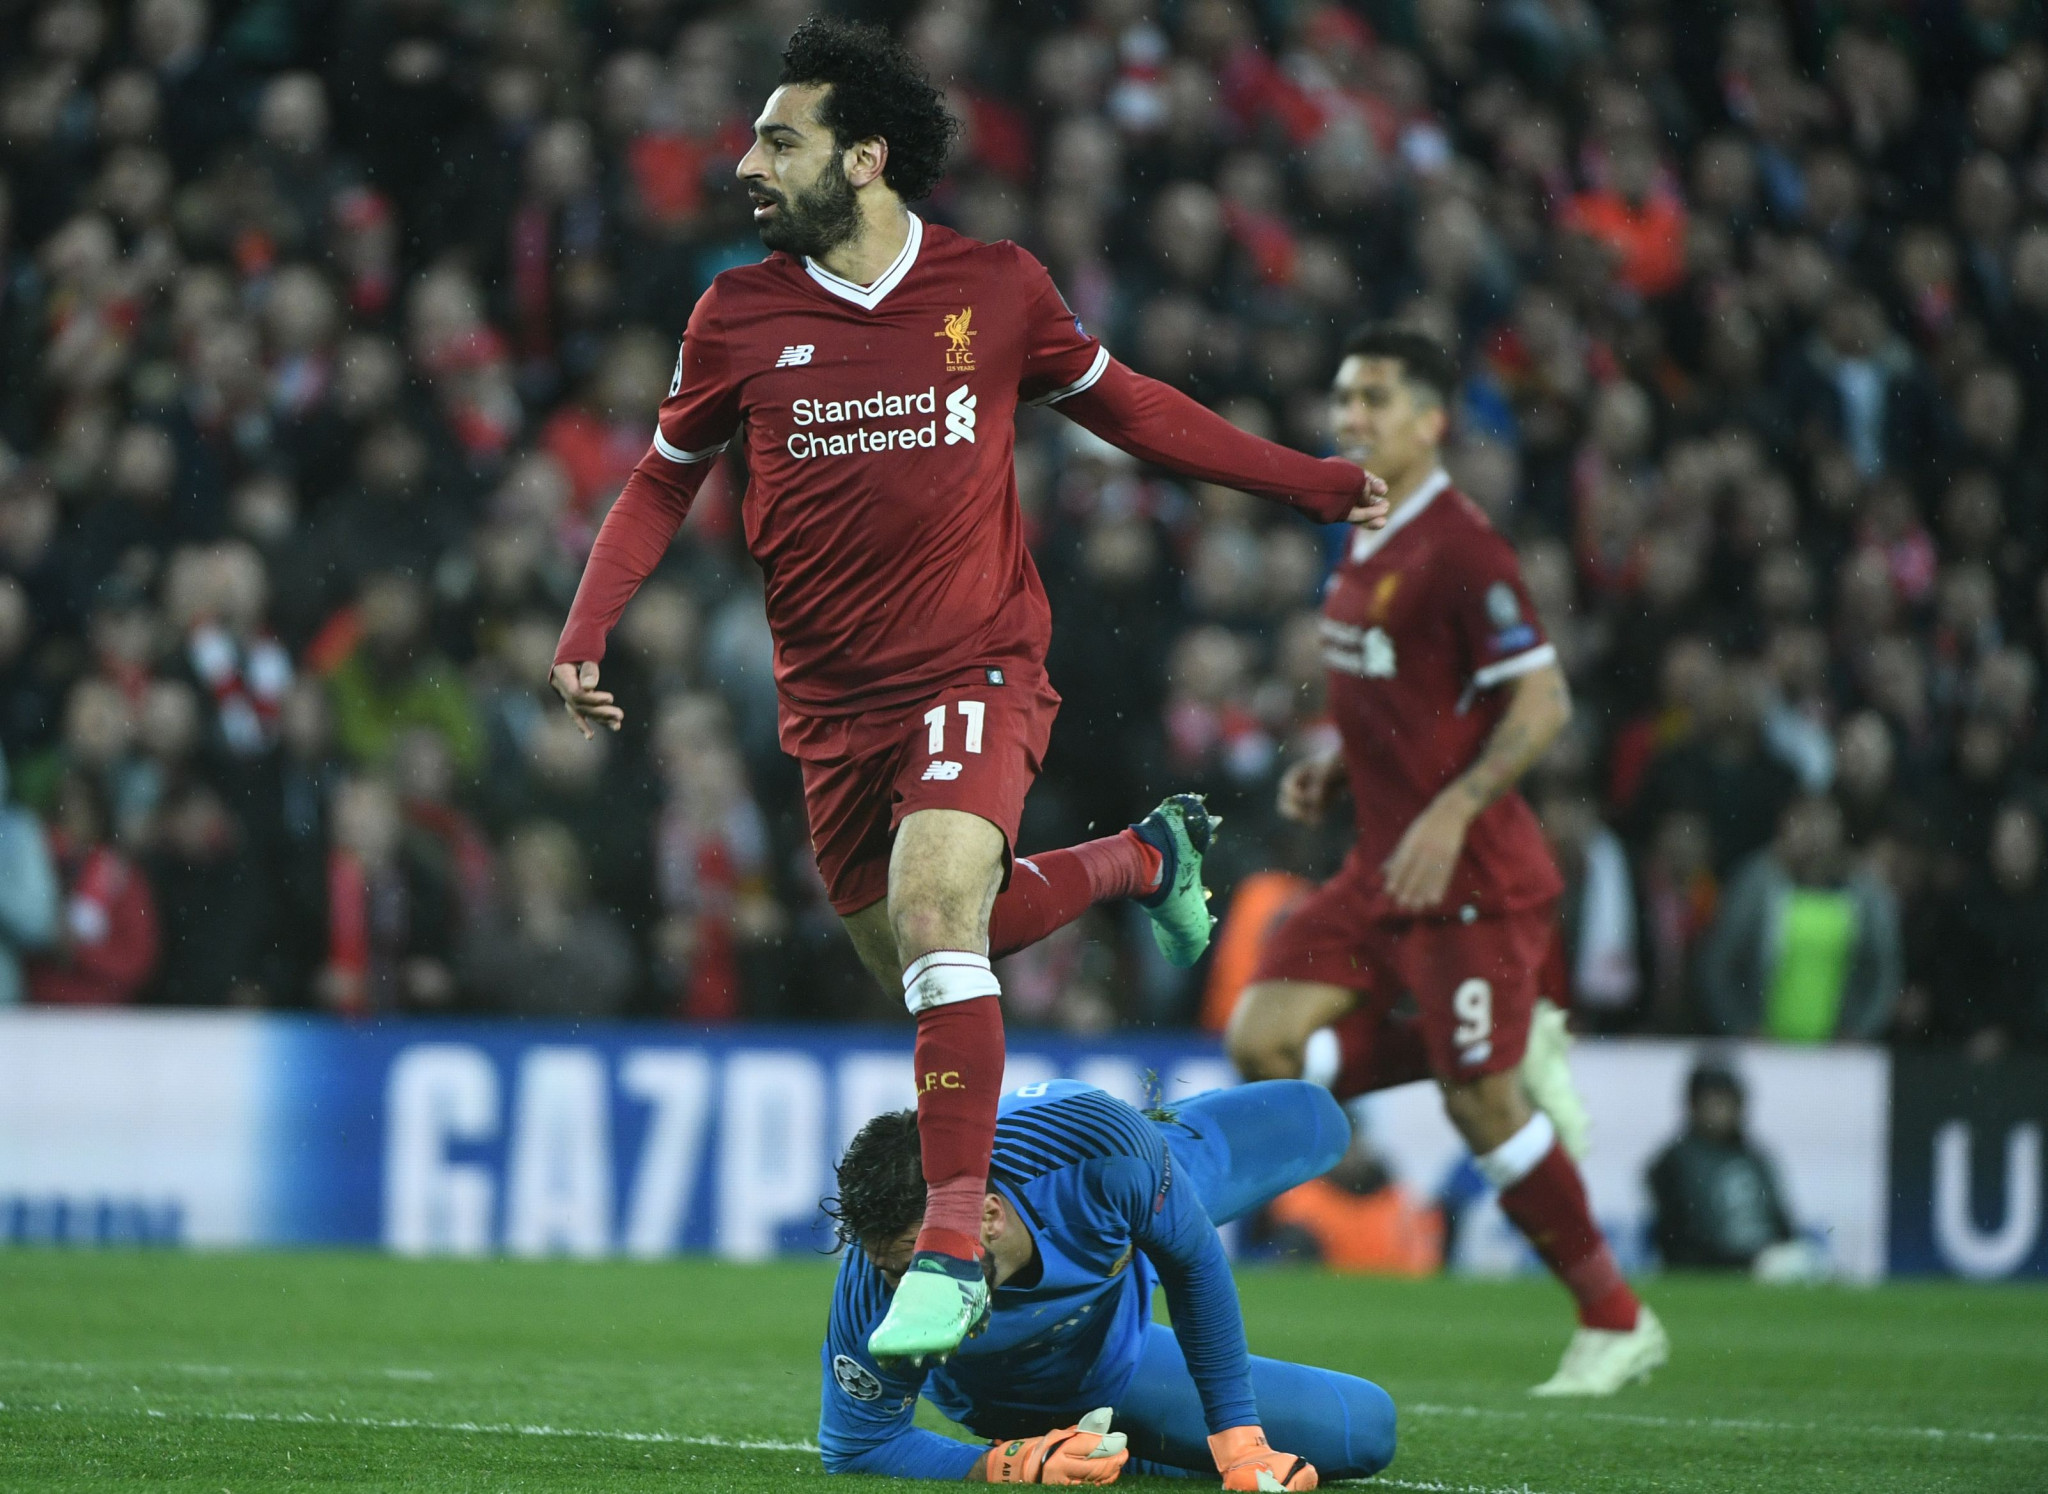 Mohamed Salah scored 11 goals in the 2017-2018 UEFA Champions League to help Liverpool reach the final ©Getty Images